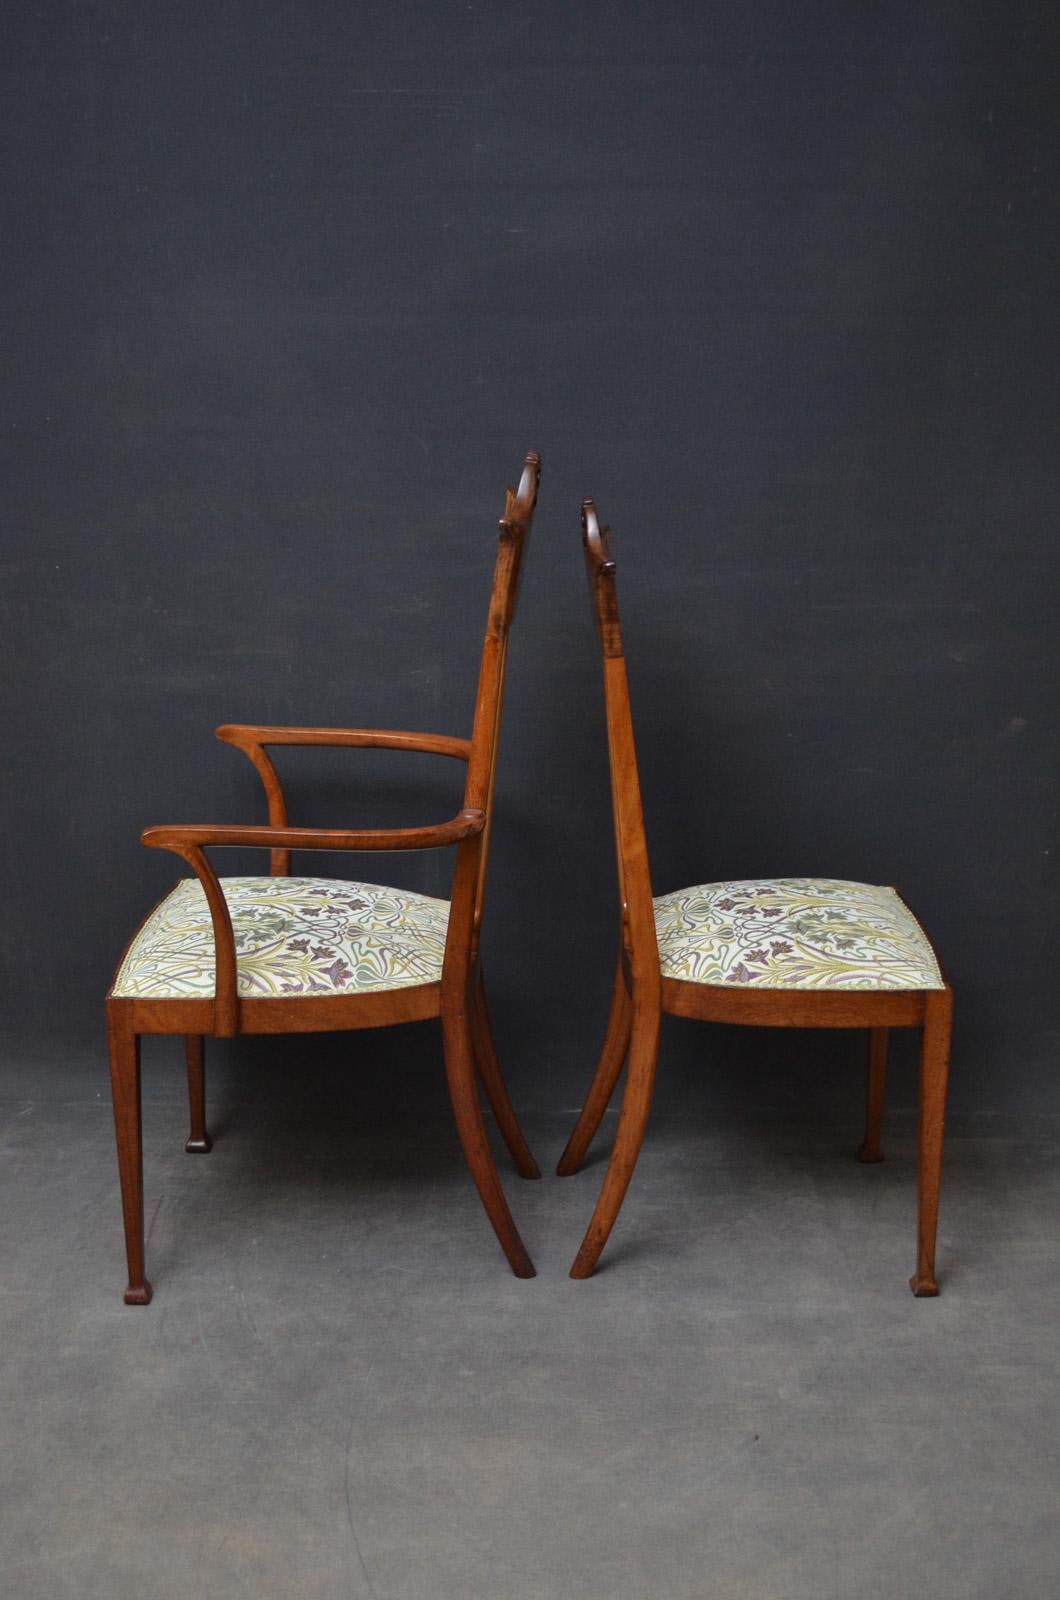 Pair of Art Nouveau Chairs in Mahogany For Sale 5